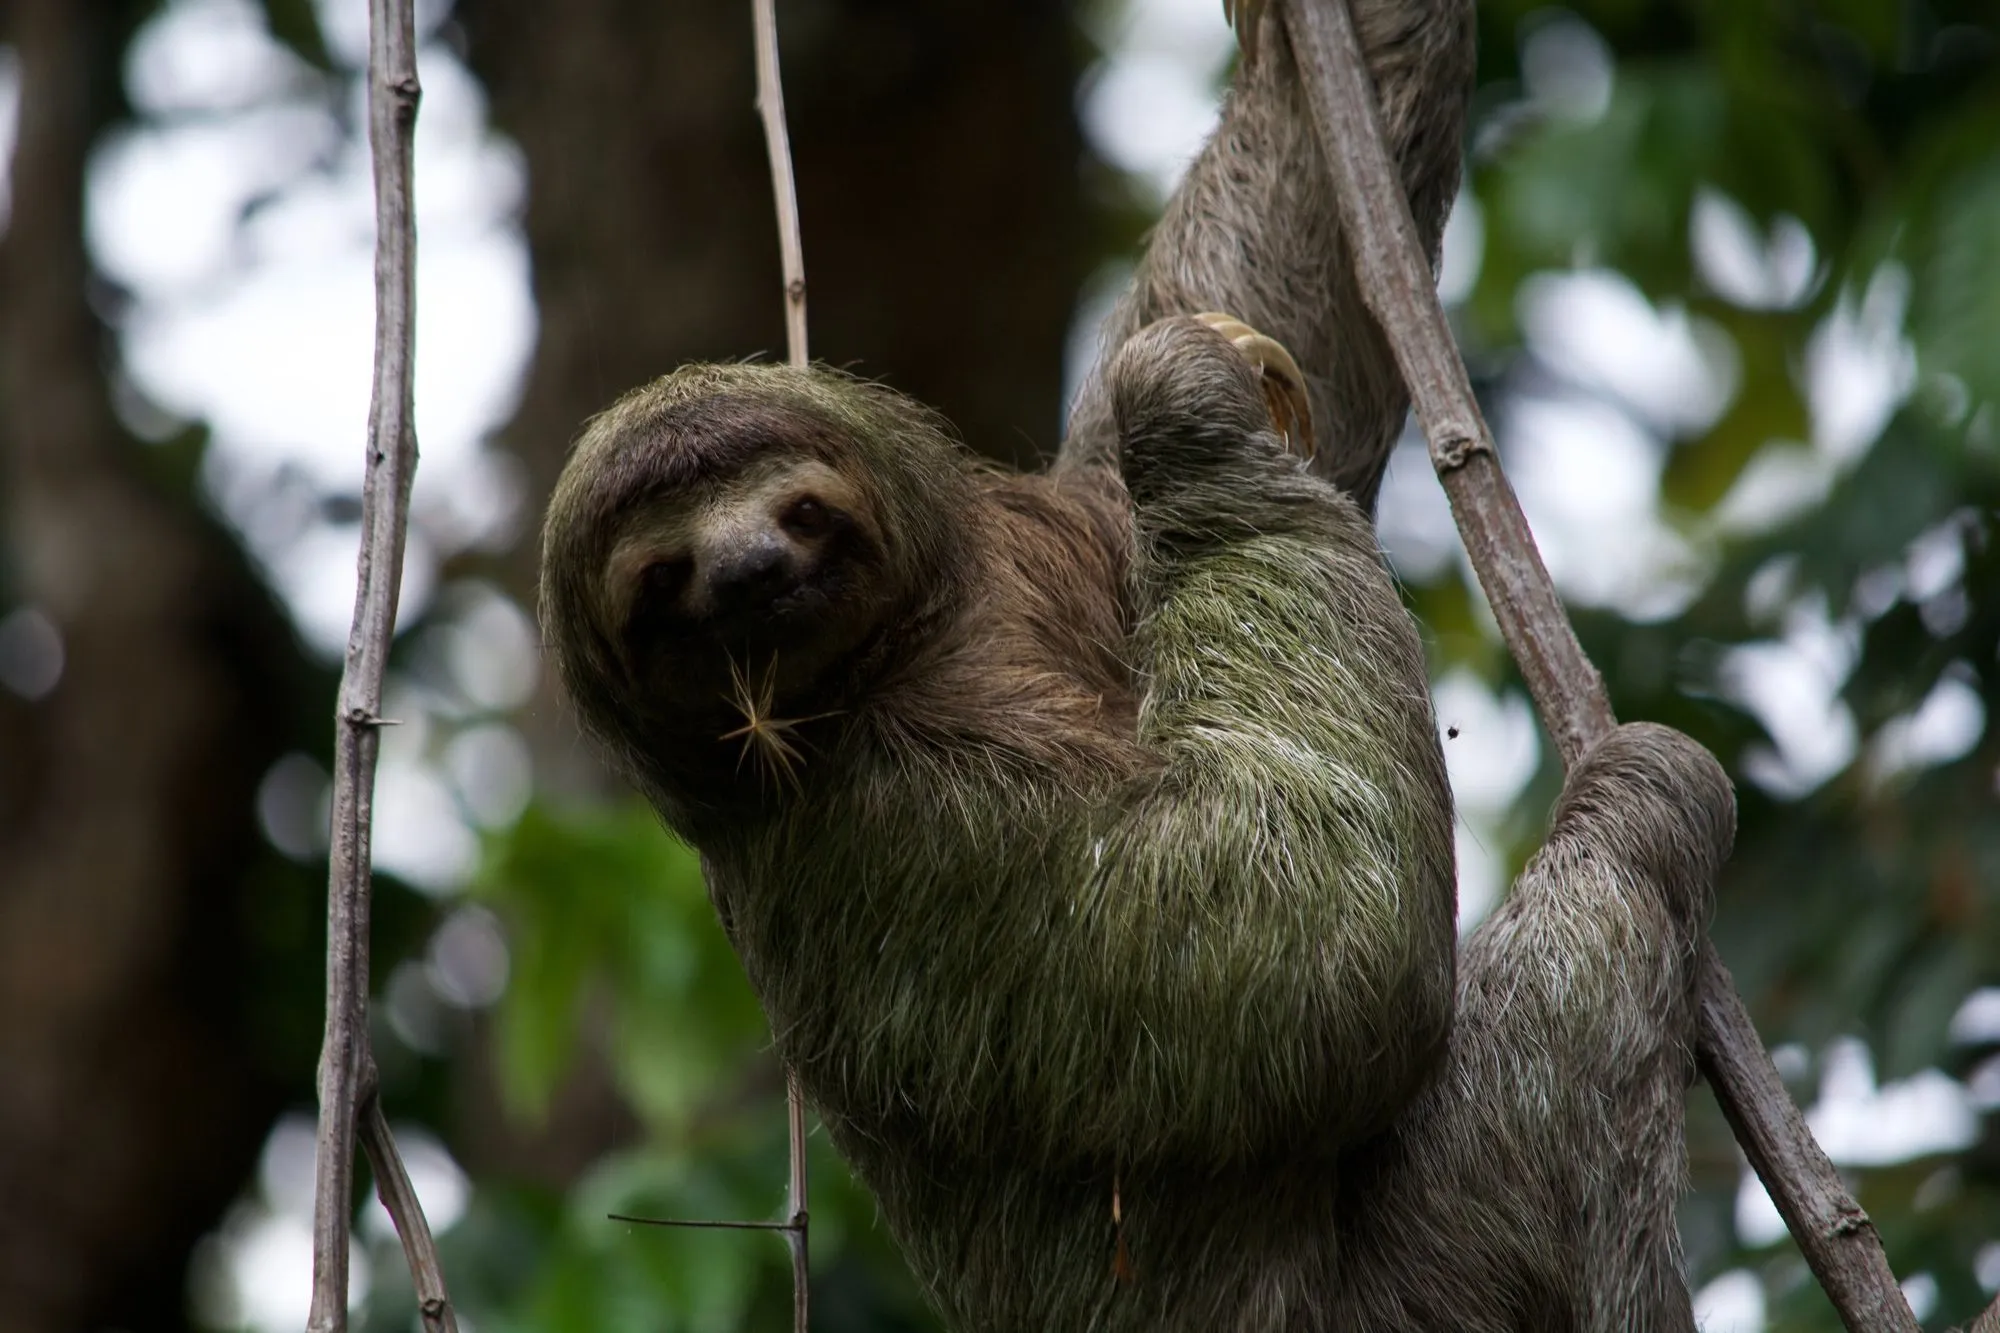 Sloths are usually found alone.